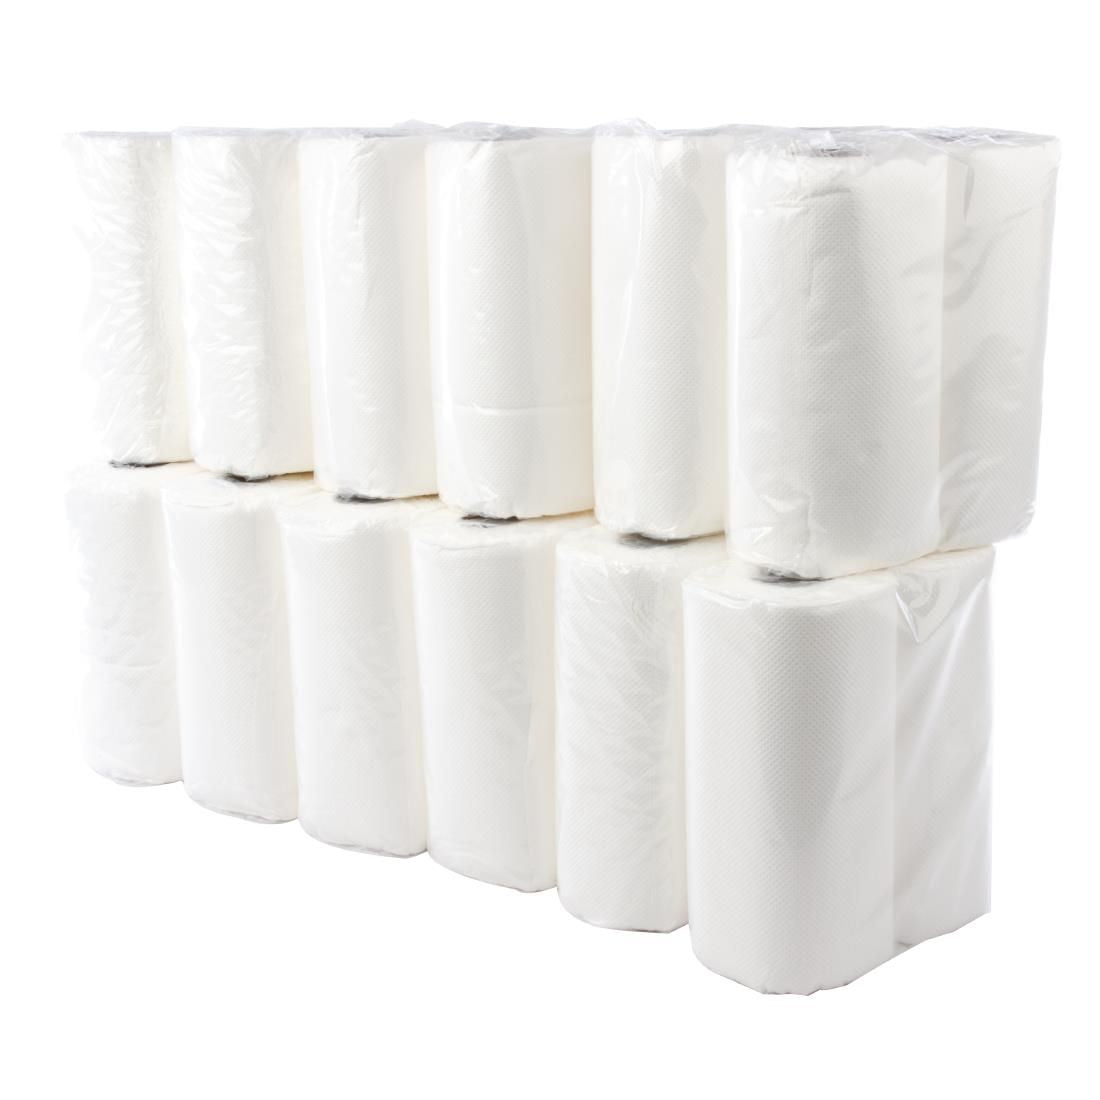 GH065 Jantex Kitchen Rolls White 2-Ply 11.5m (Pack of 24) JD Catering Equipment Solutions Ltd